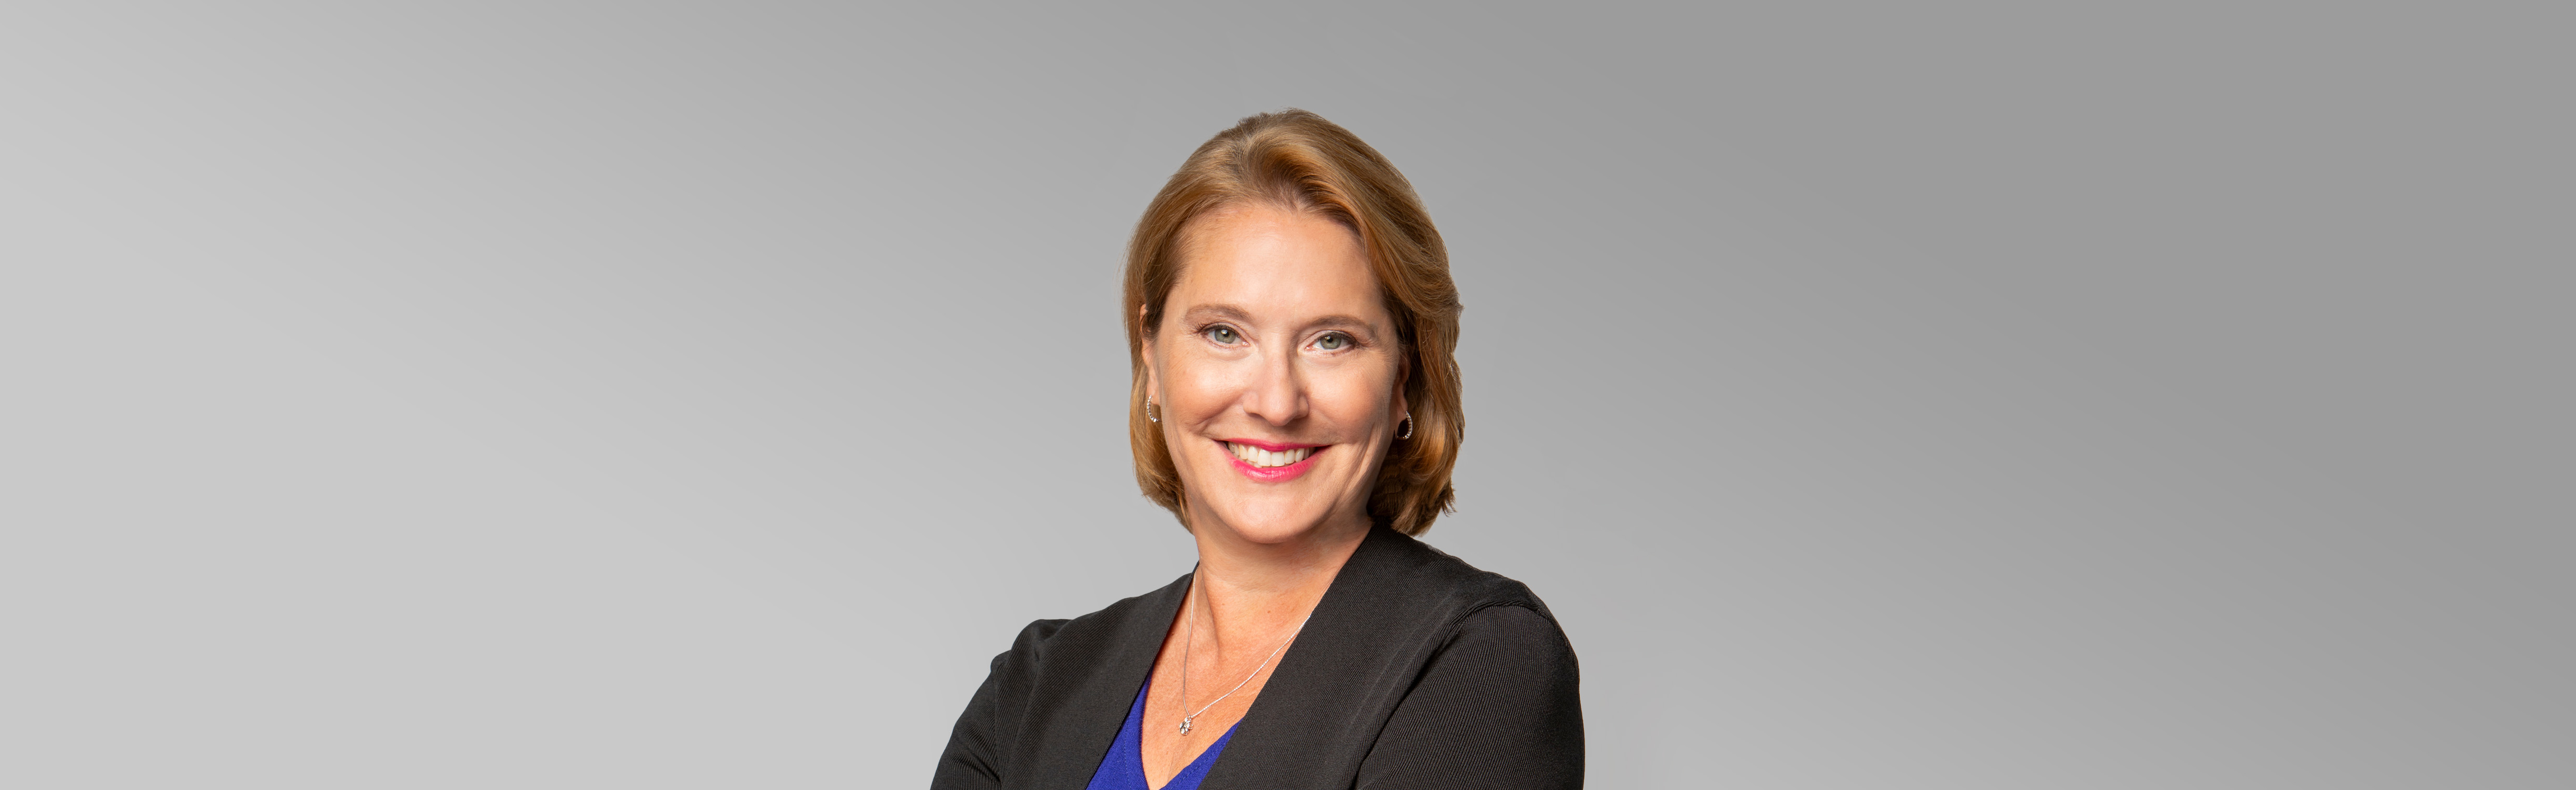 Photo of Geralyn Ritter, Executive Vice President, Corporate Affairs, Sustainability & ESG